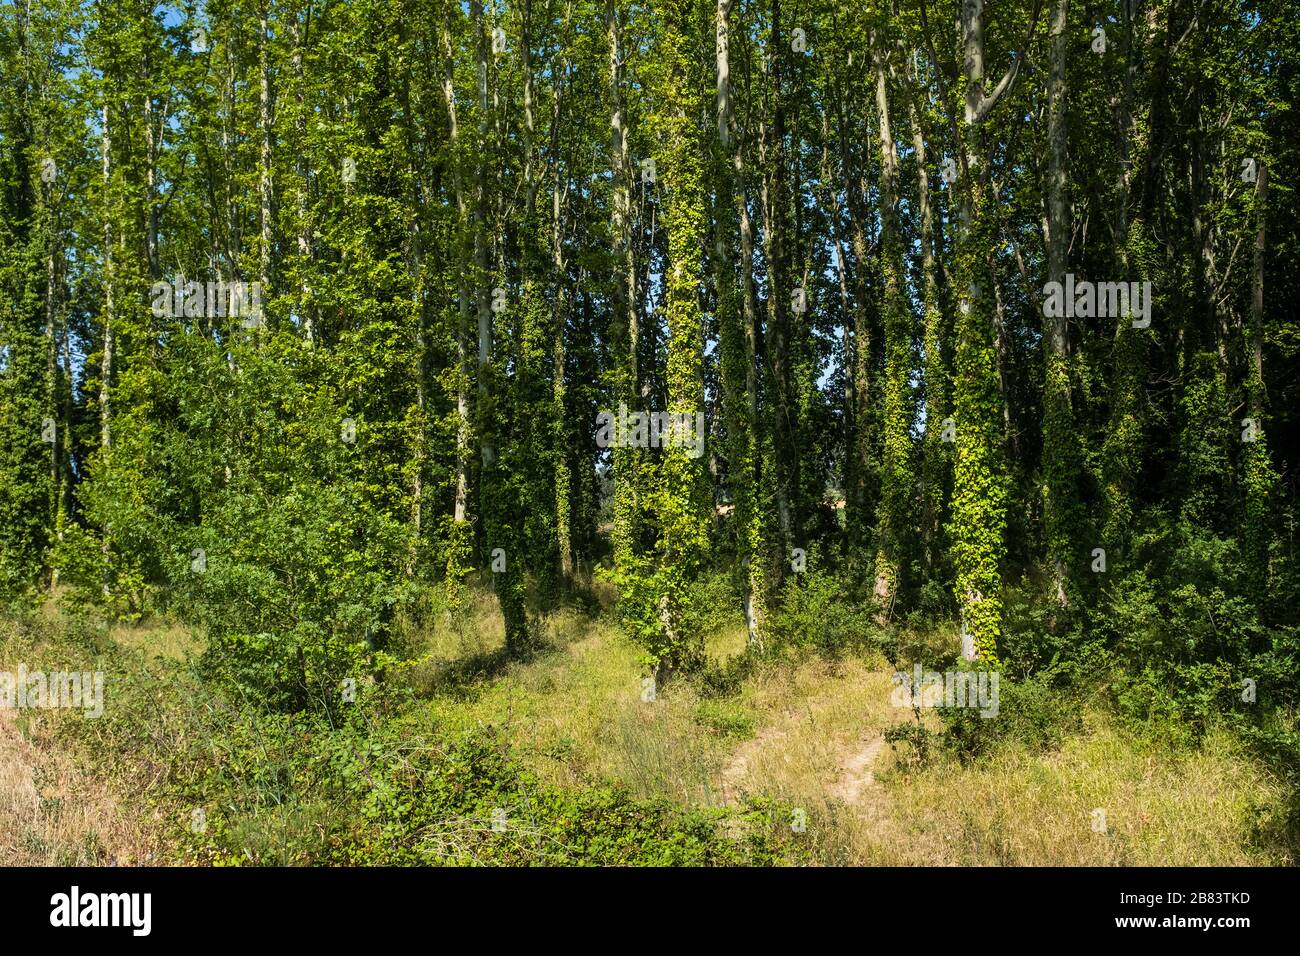 The warm summer light enhances the bright green foliage of the leaves in this tranquil natural landscape. Stock Photo